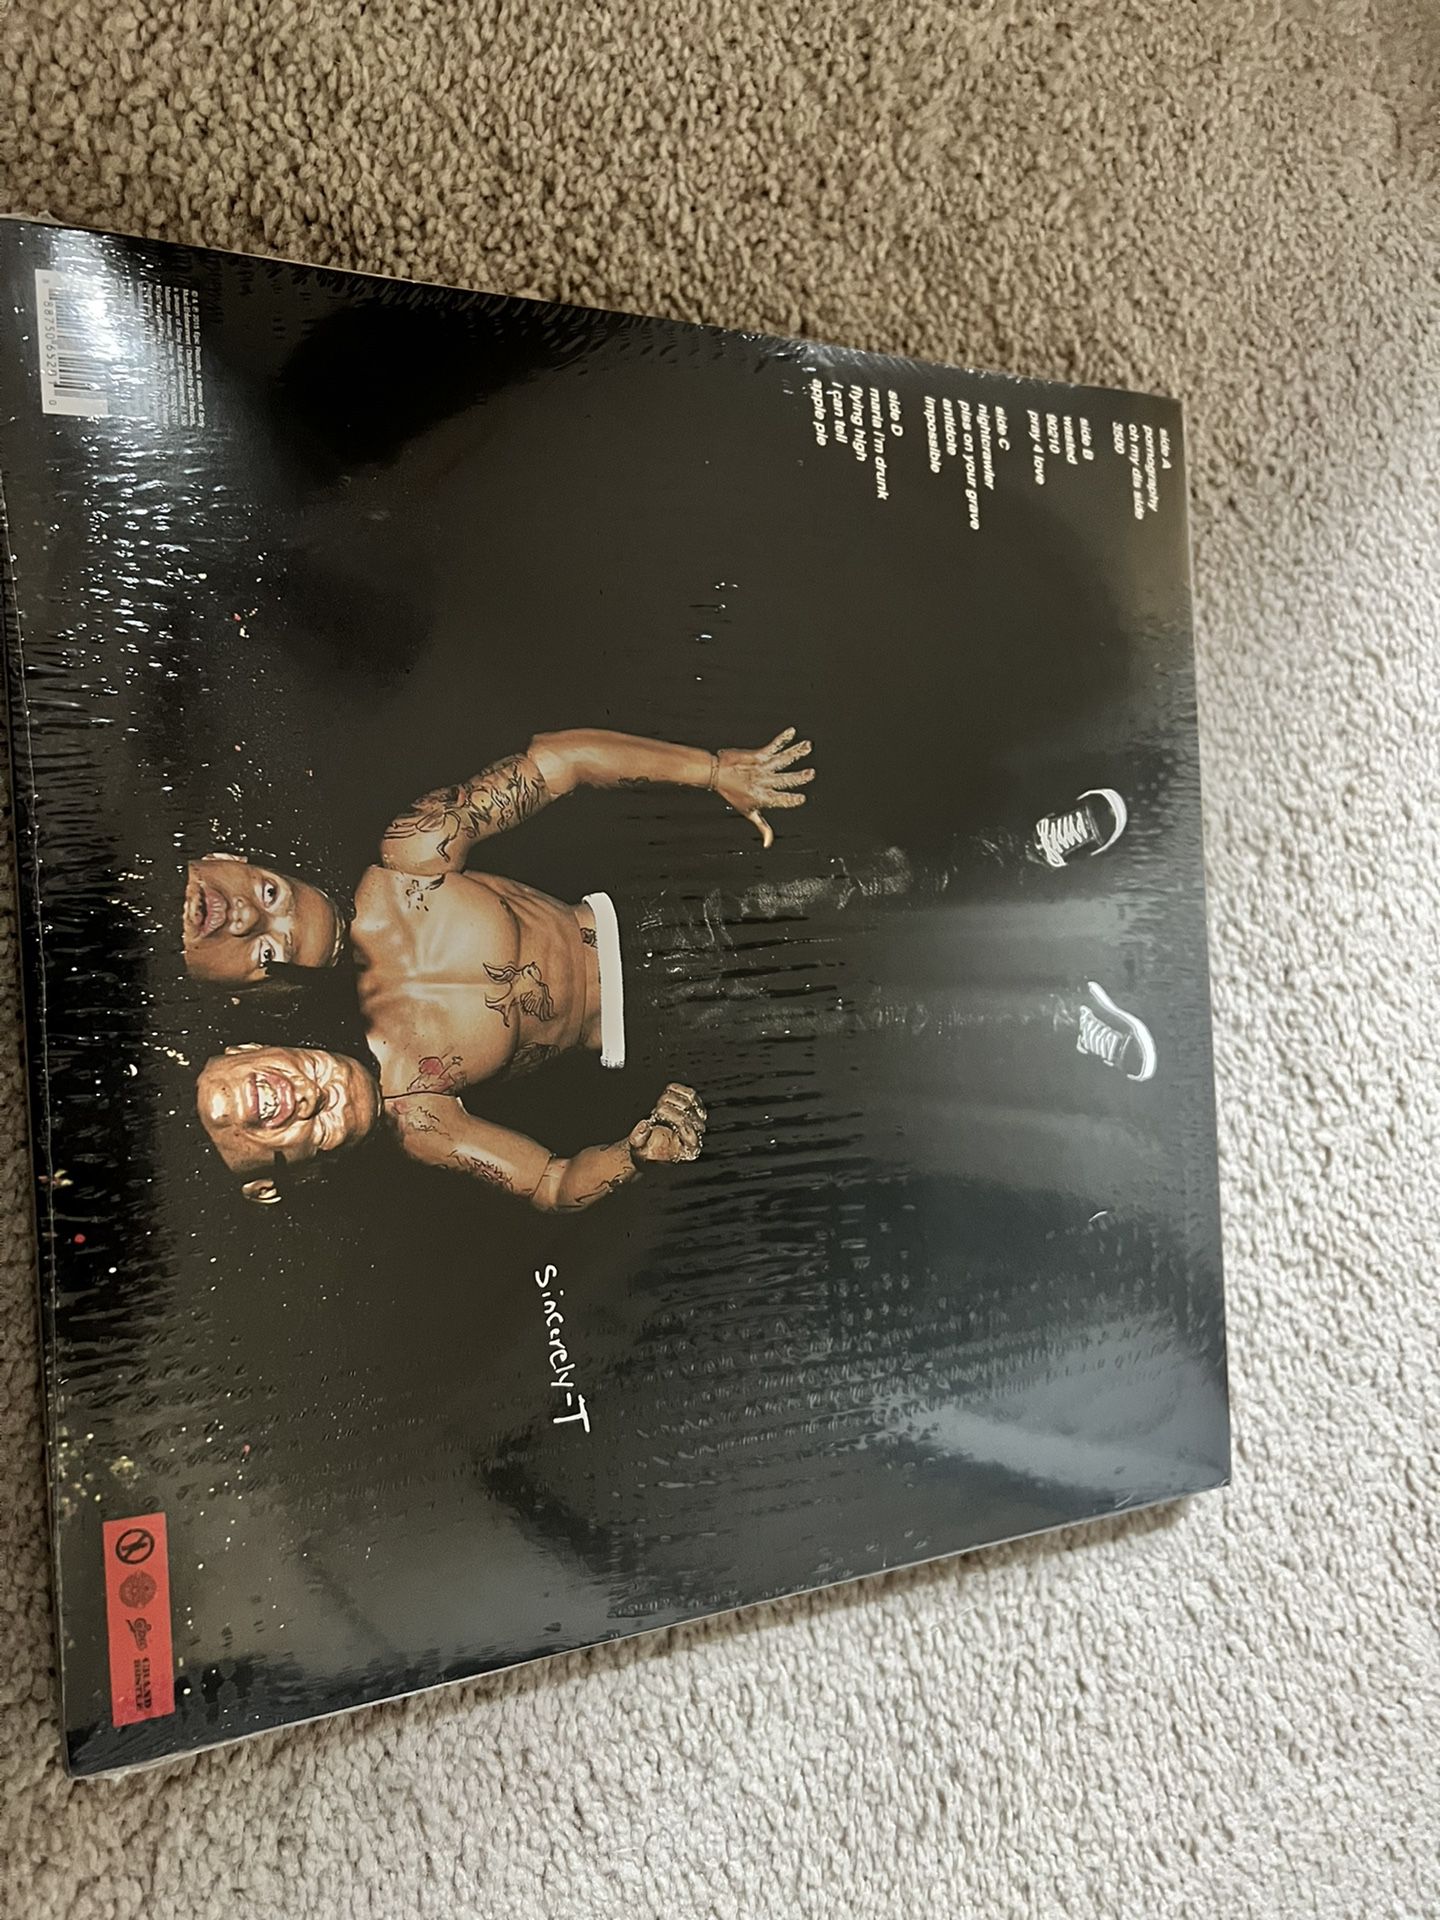 Vinyl Record: Travis Scott RODEO Wrapped for Sale in Spring, TX